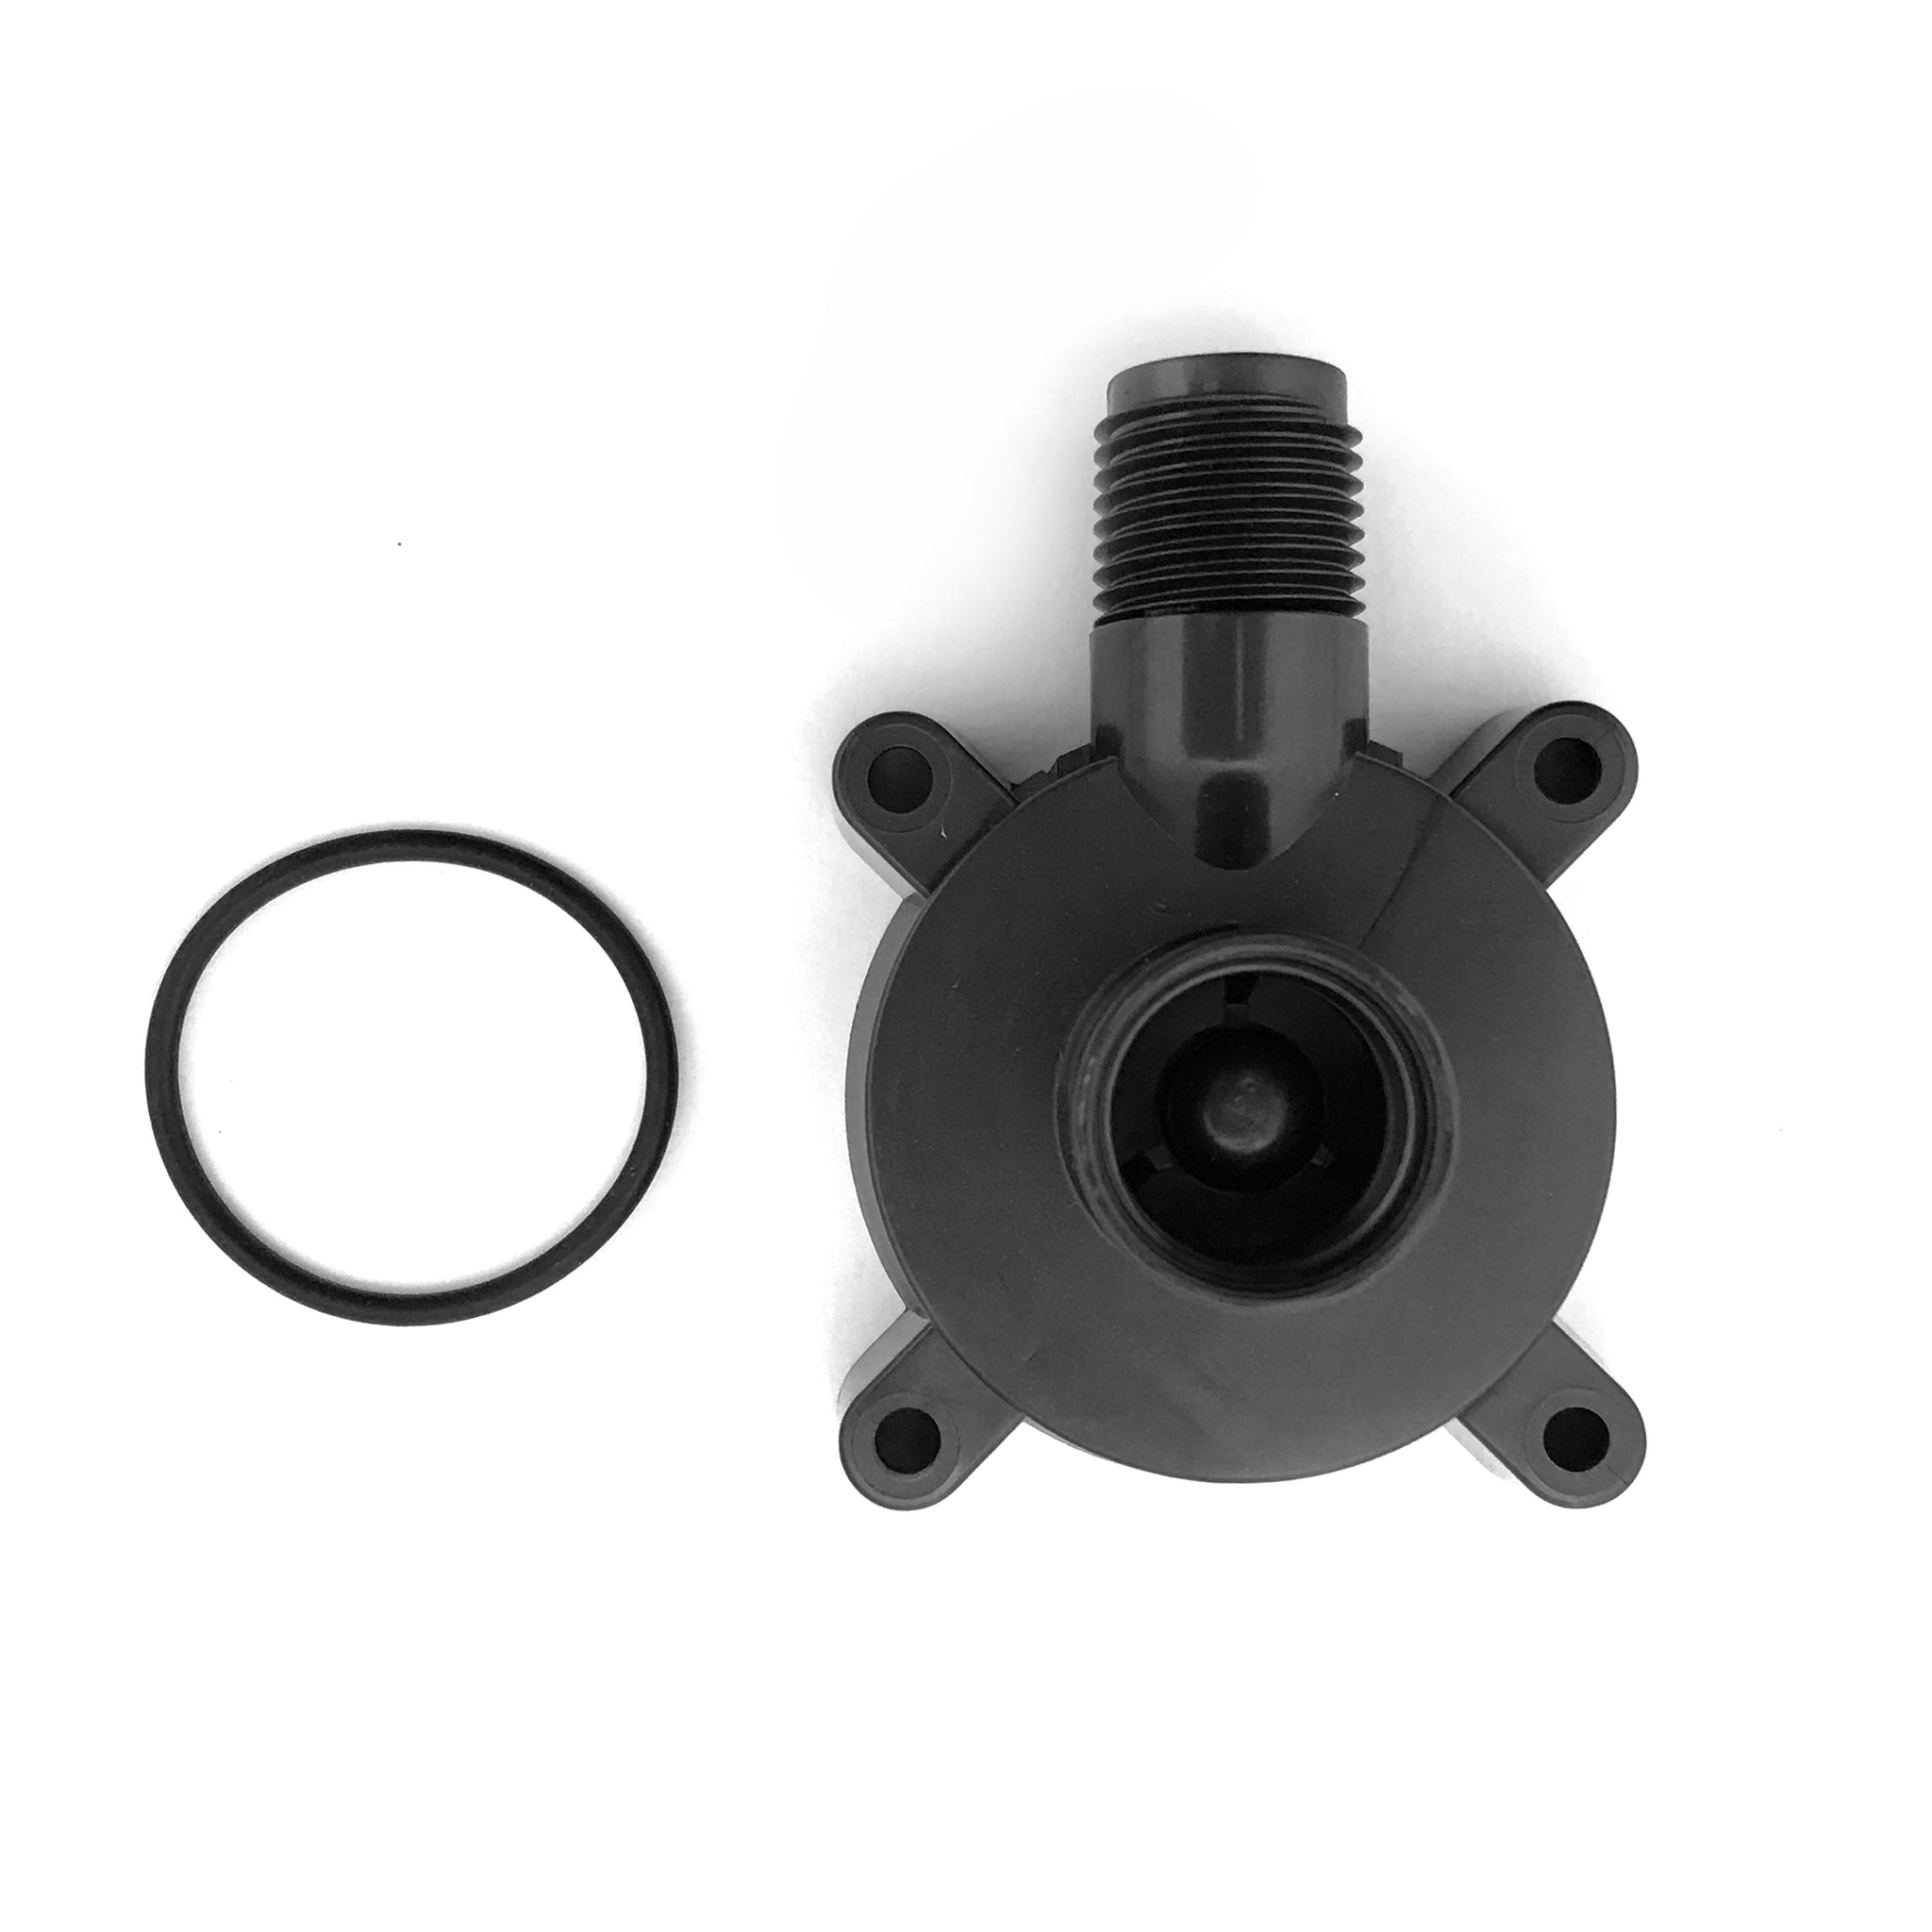 Replacement Pump Cover/Volute for Model 5 and Model 7 Mag Drive Pumps